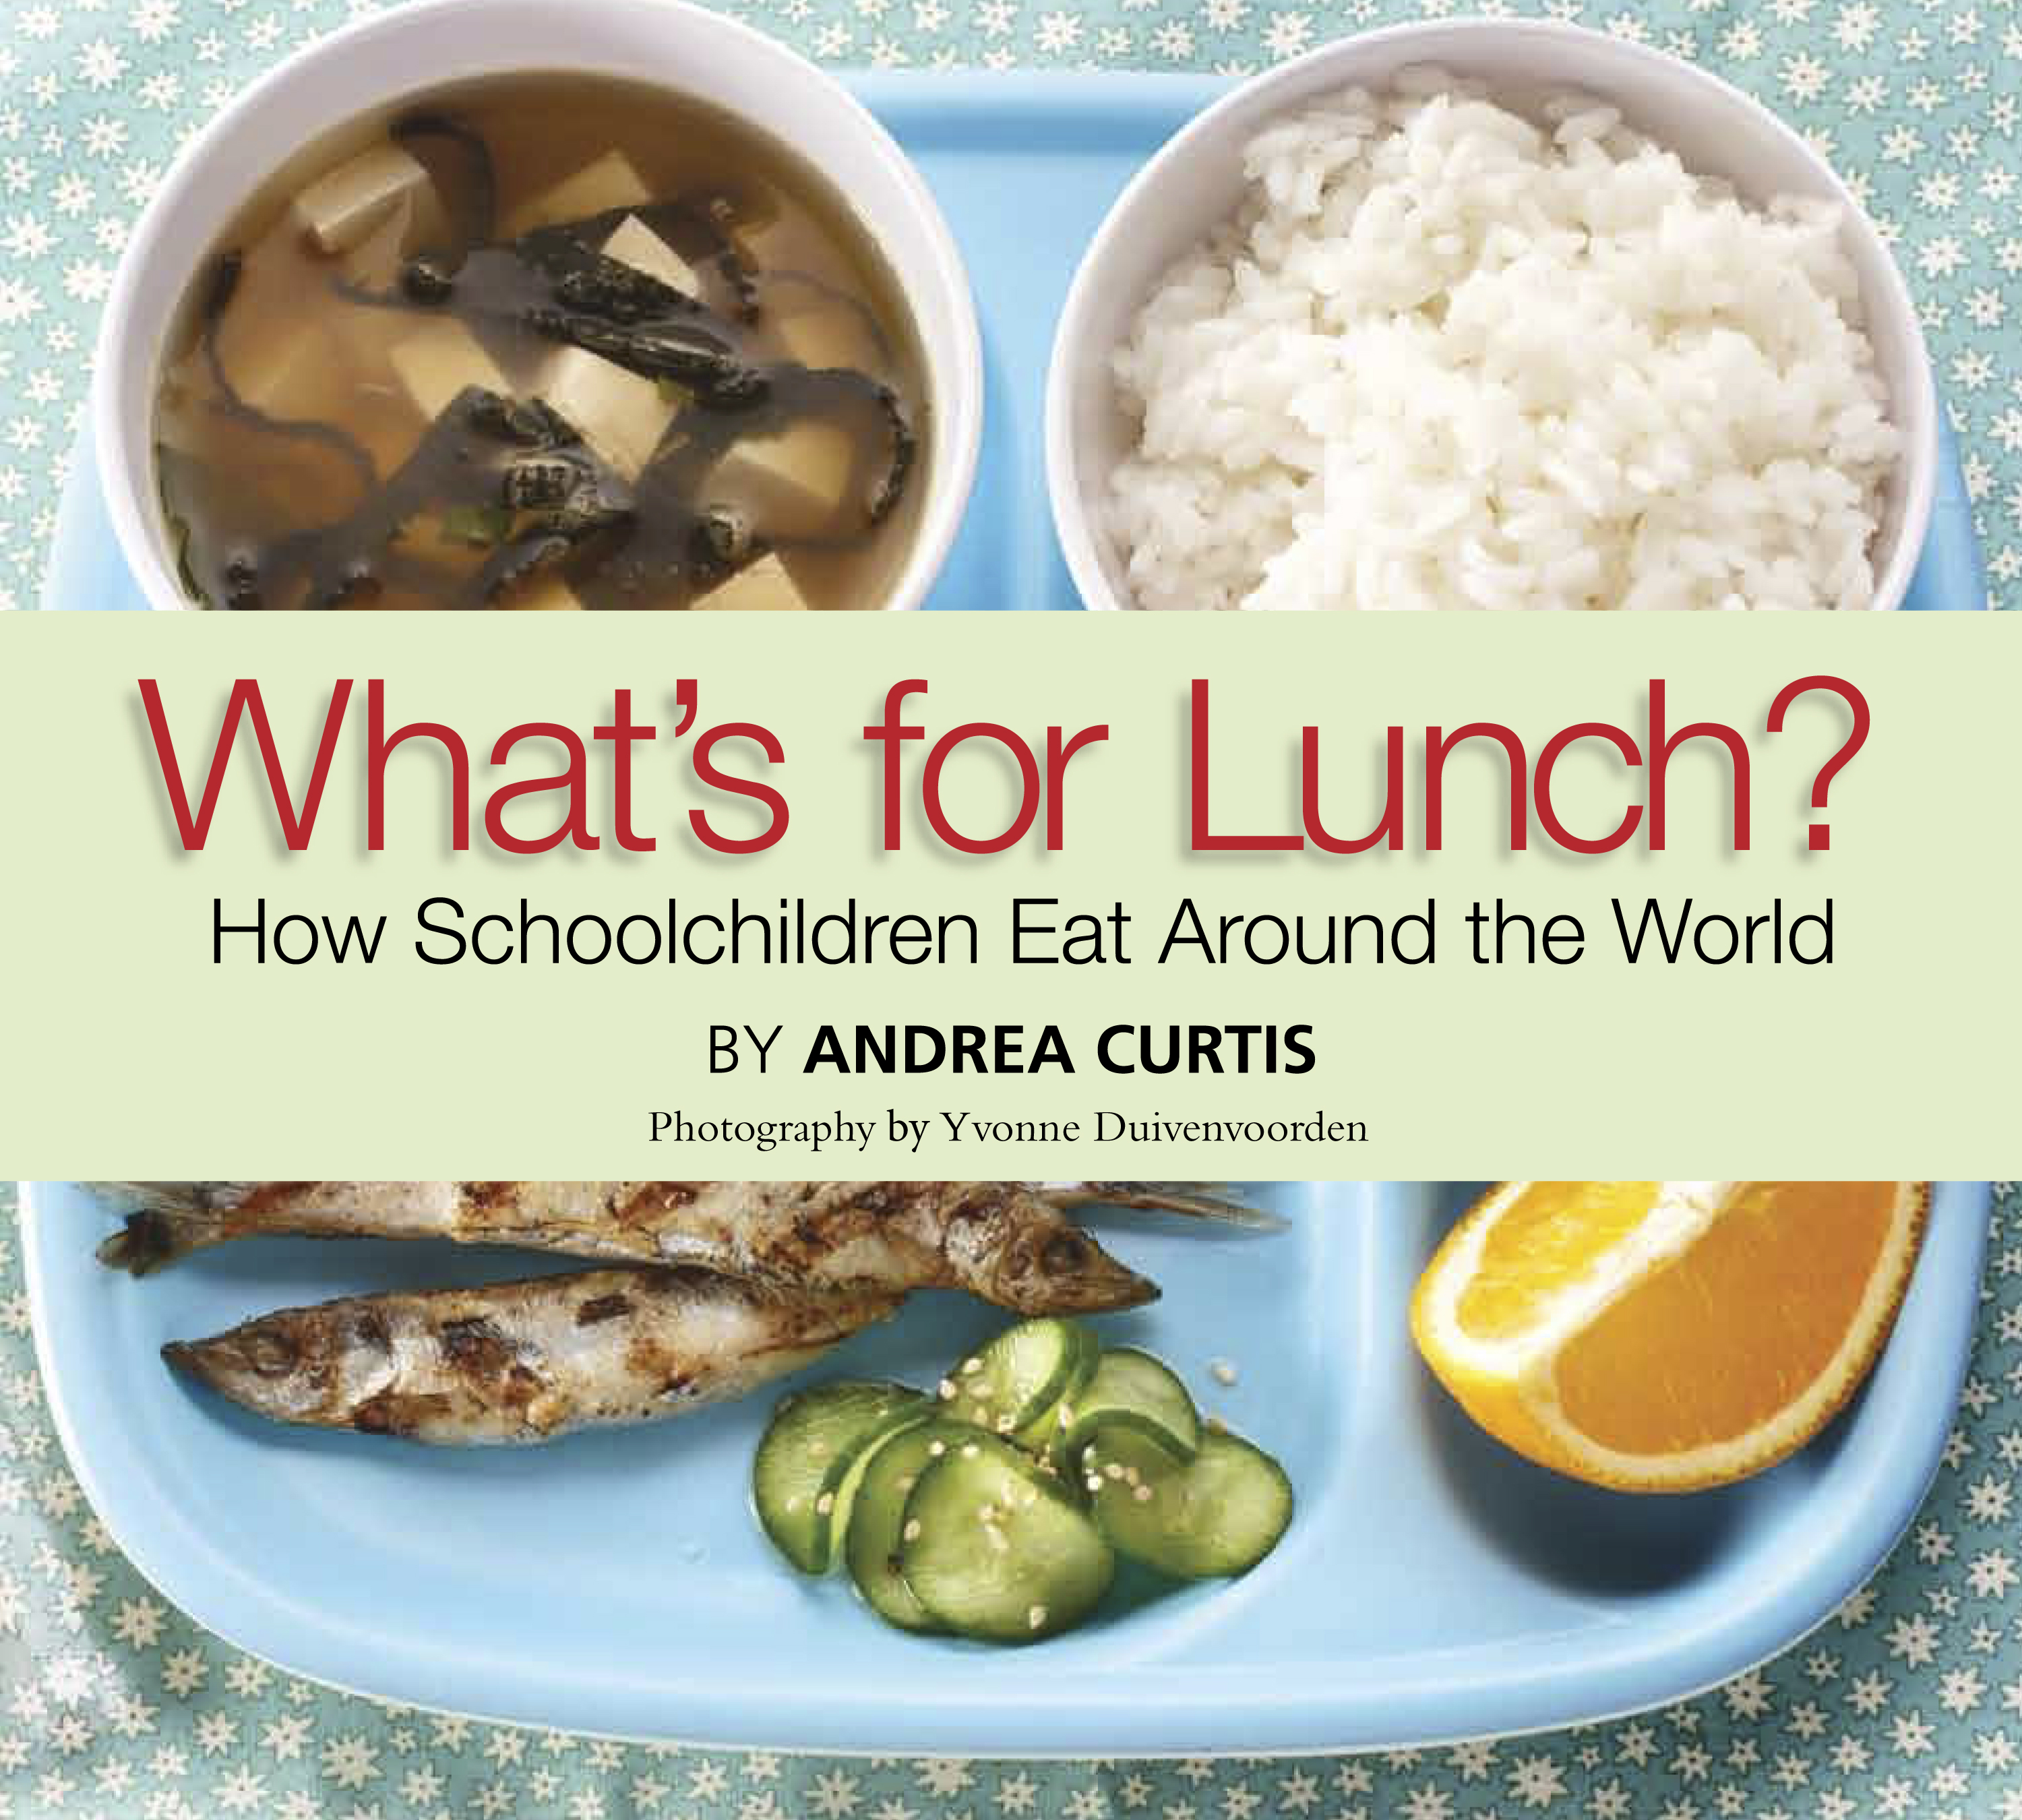 "What's For Lunch?" Author Interview and Book Giveaway! - The Lunch Tray